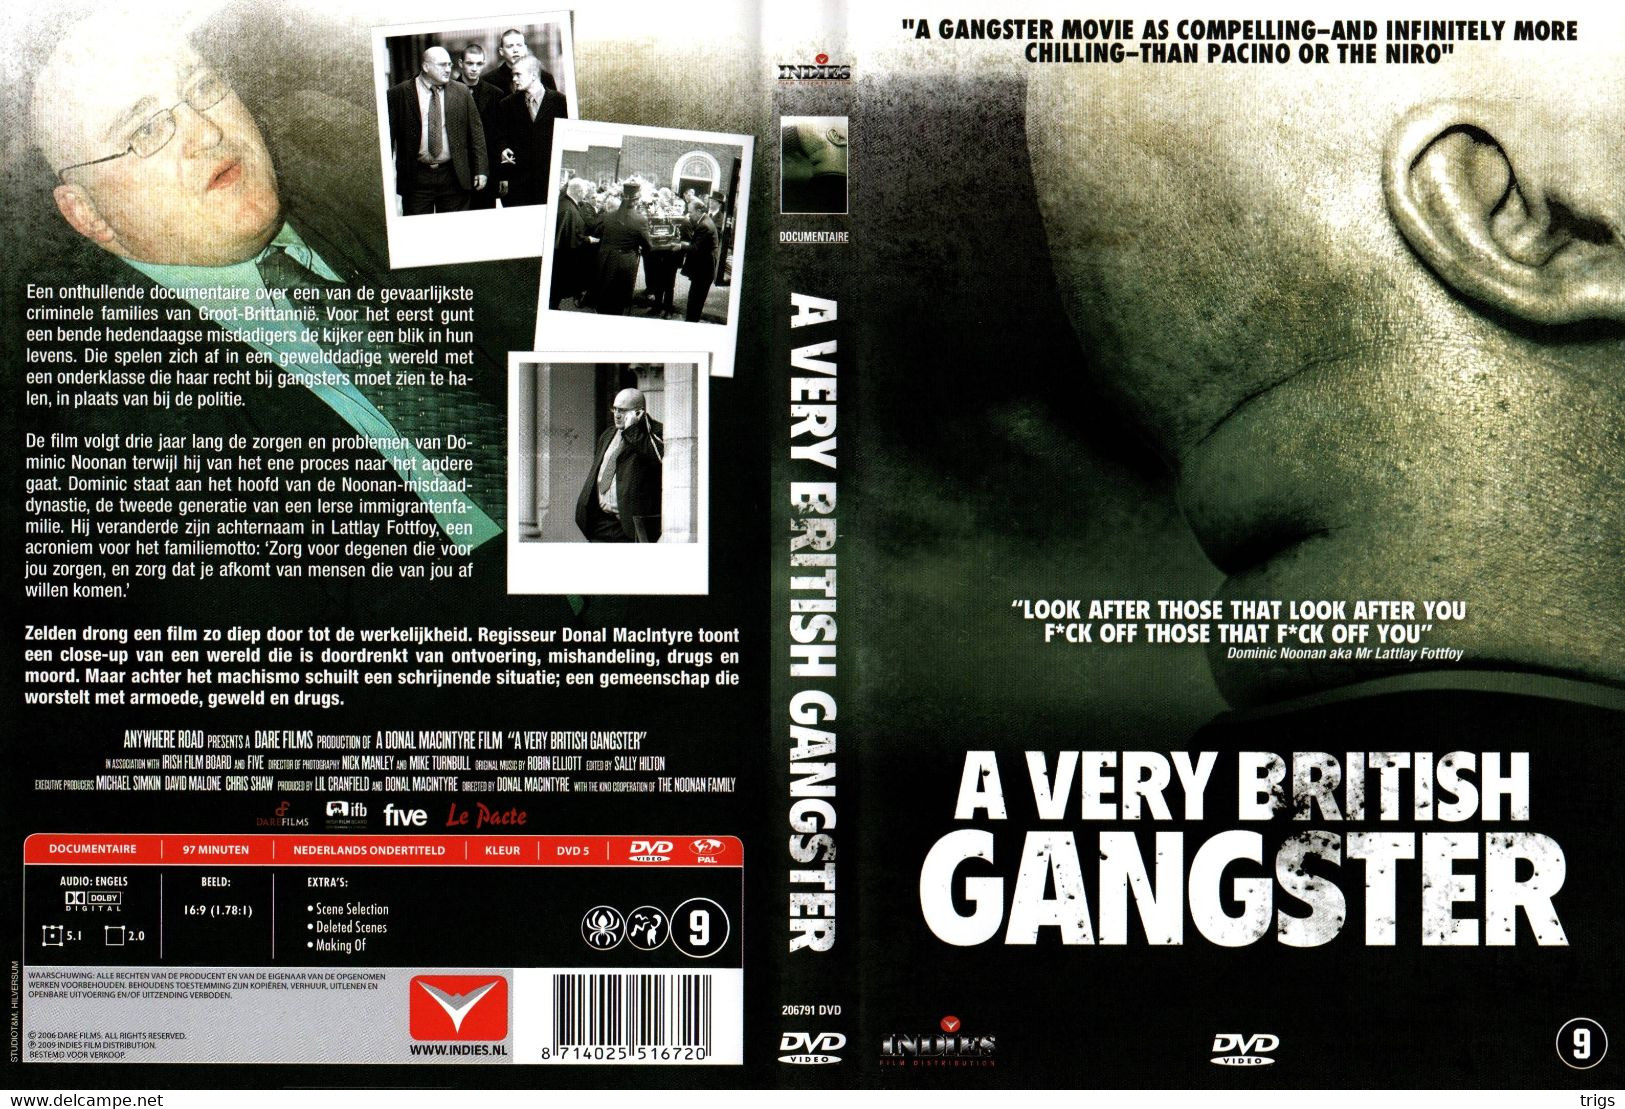 DVD - A Very British Gangster - Documentaires